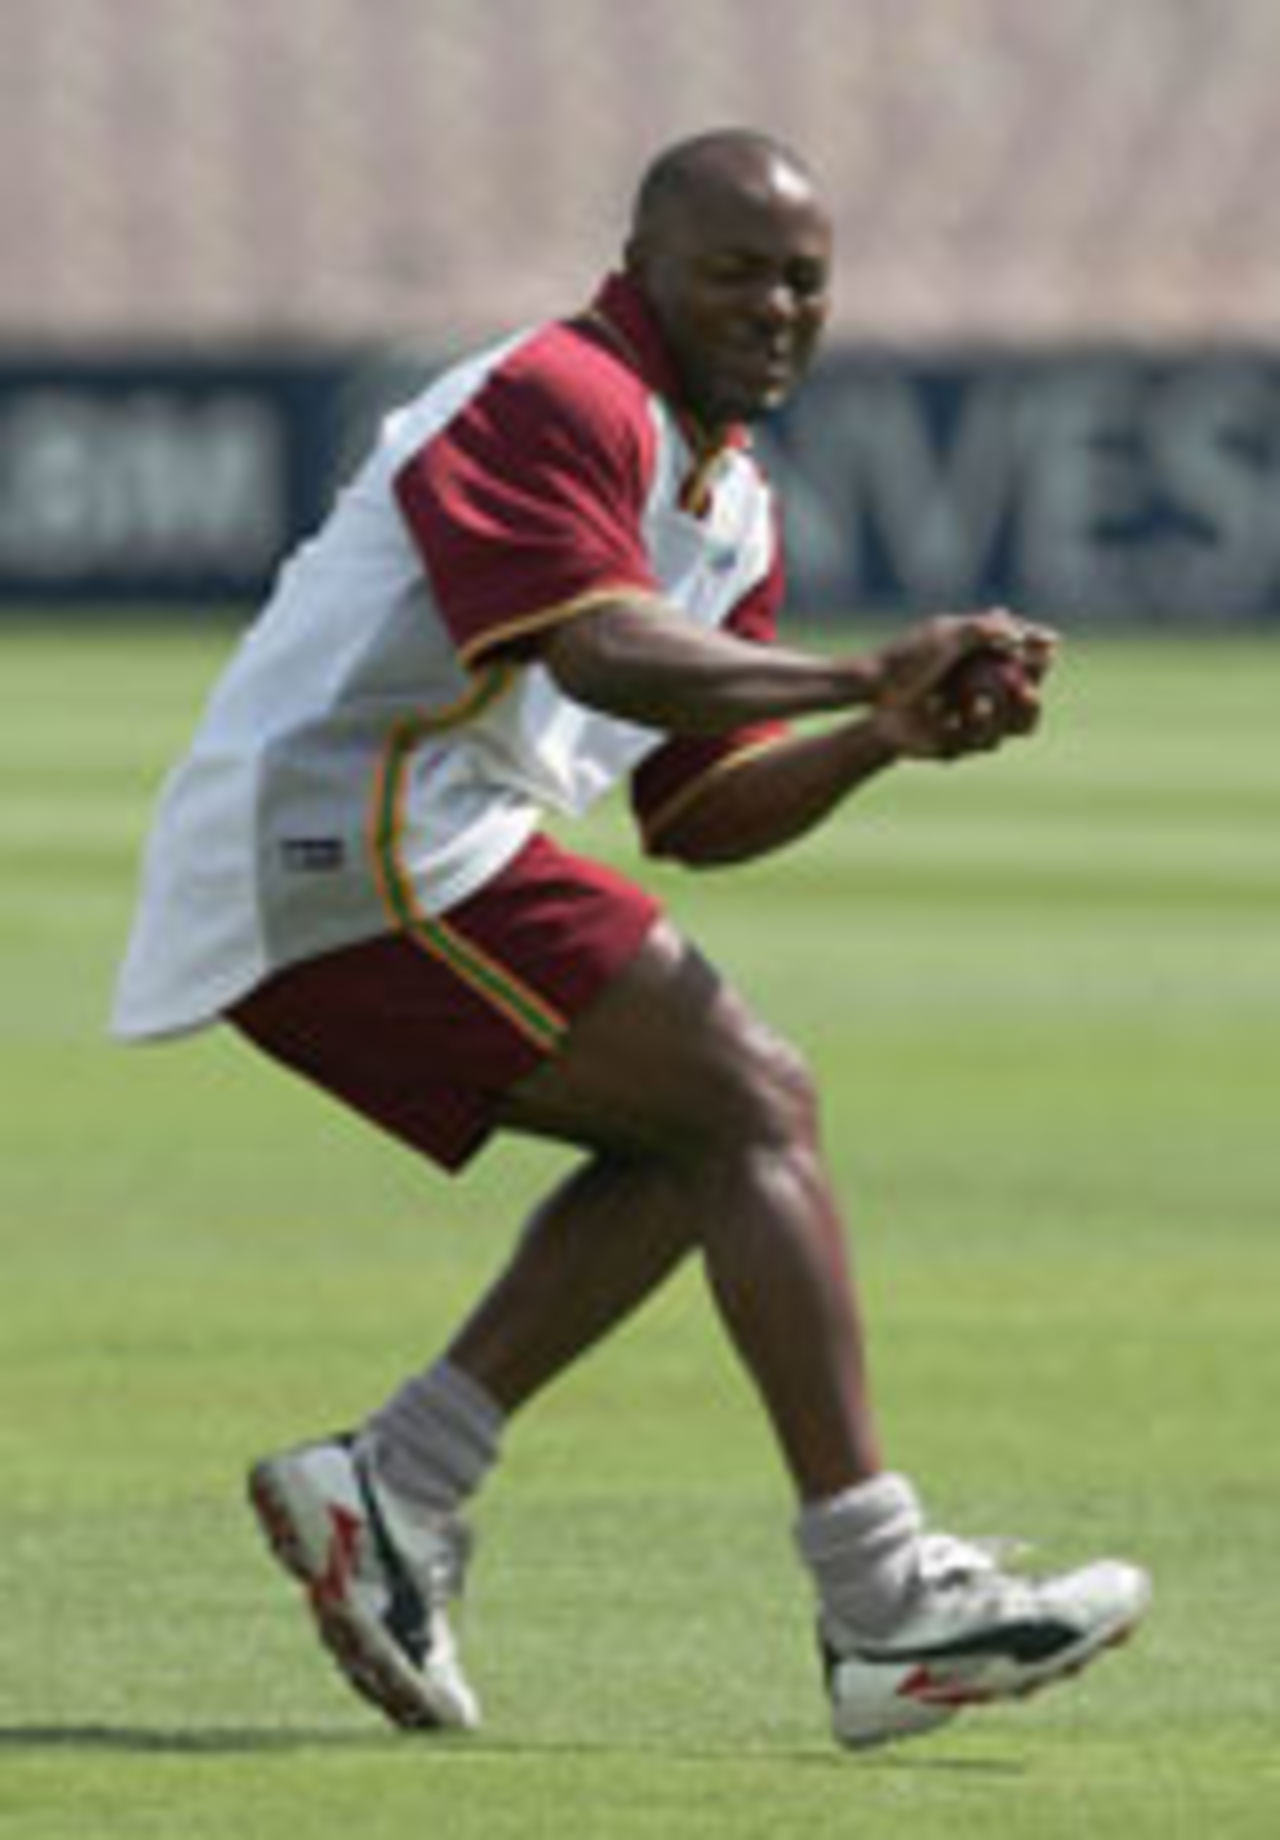 Brian Lara warms up for the third Test, Old Trafford, August 11, 2004